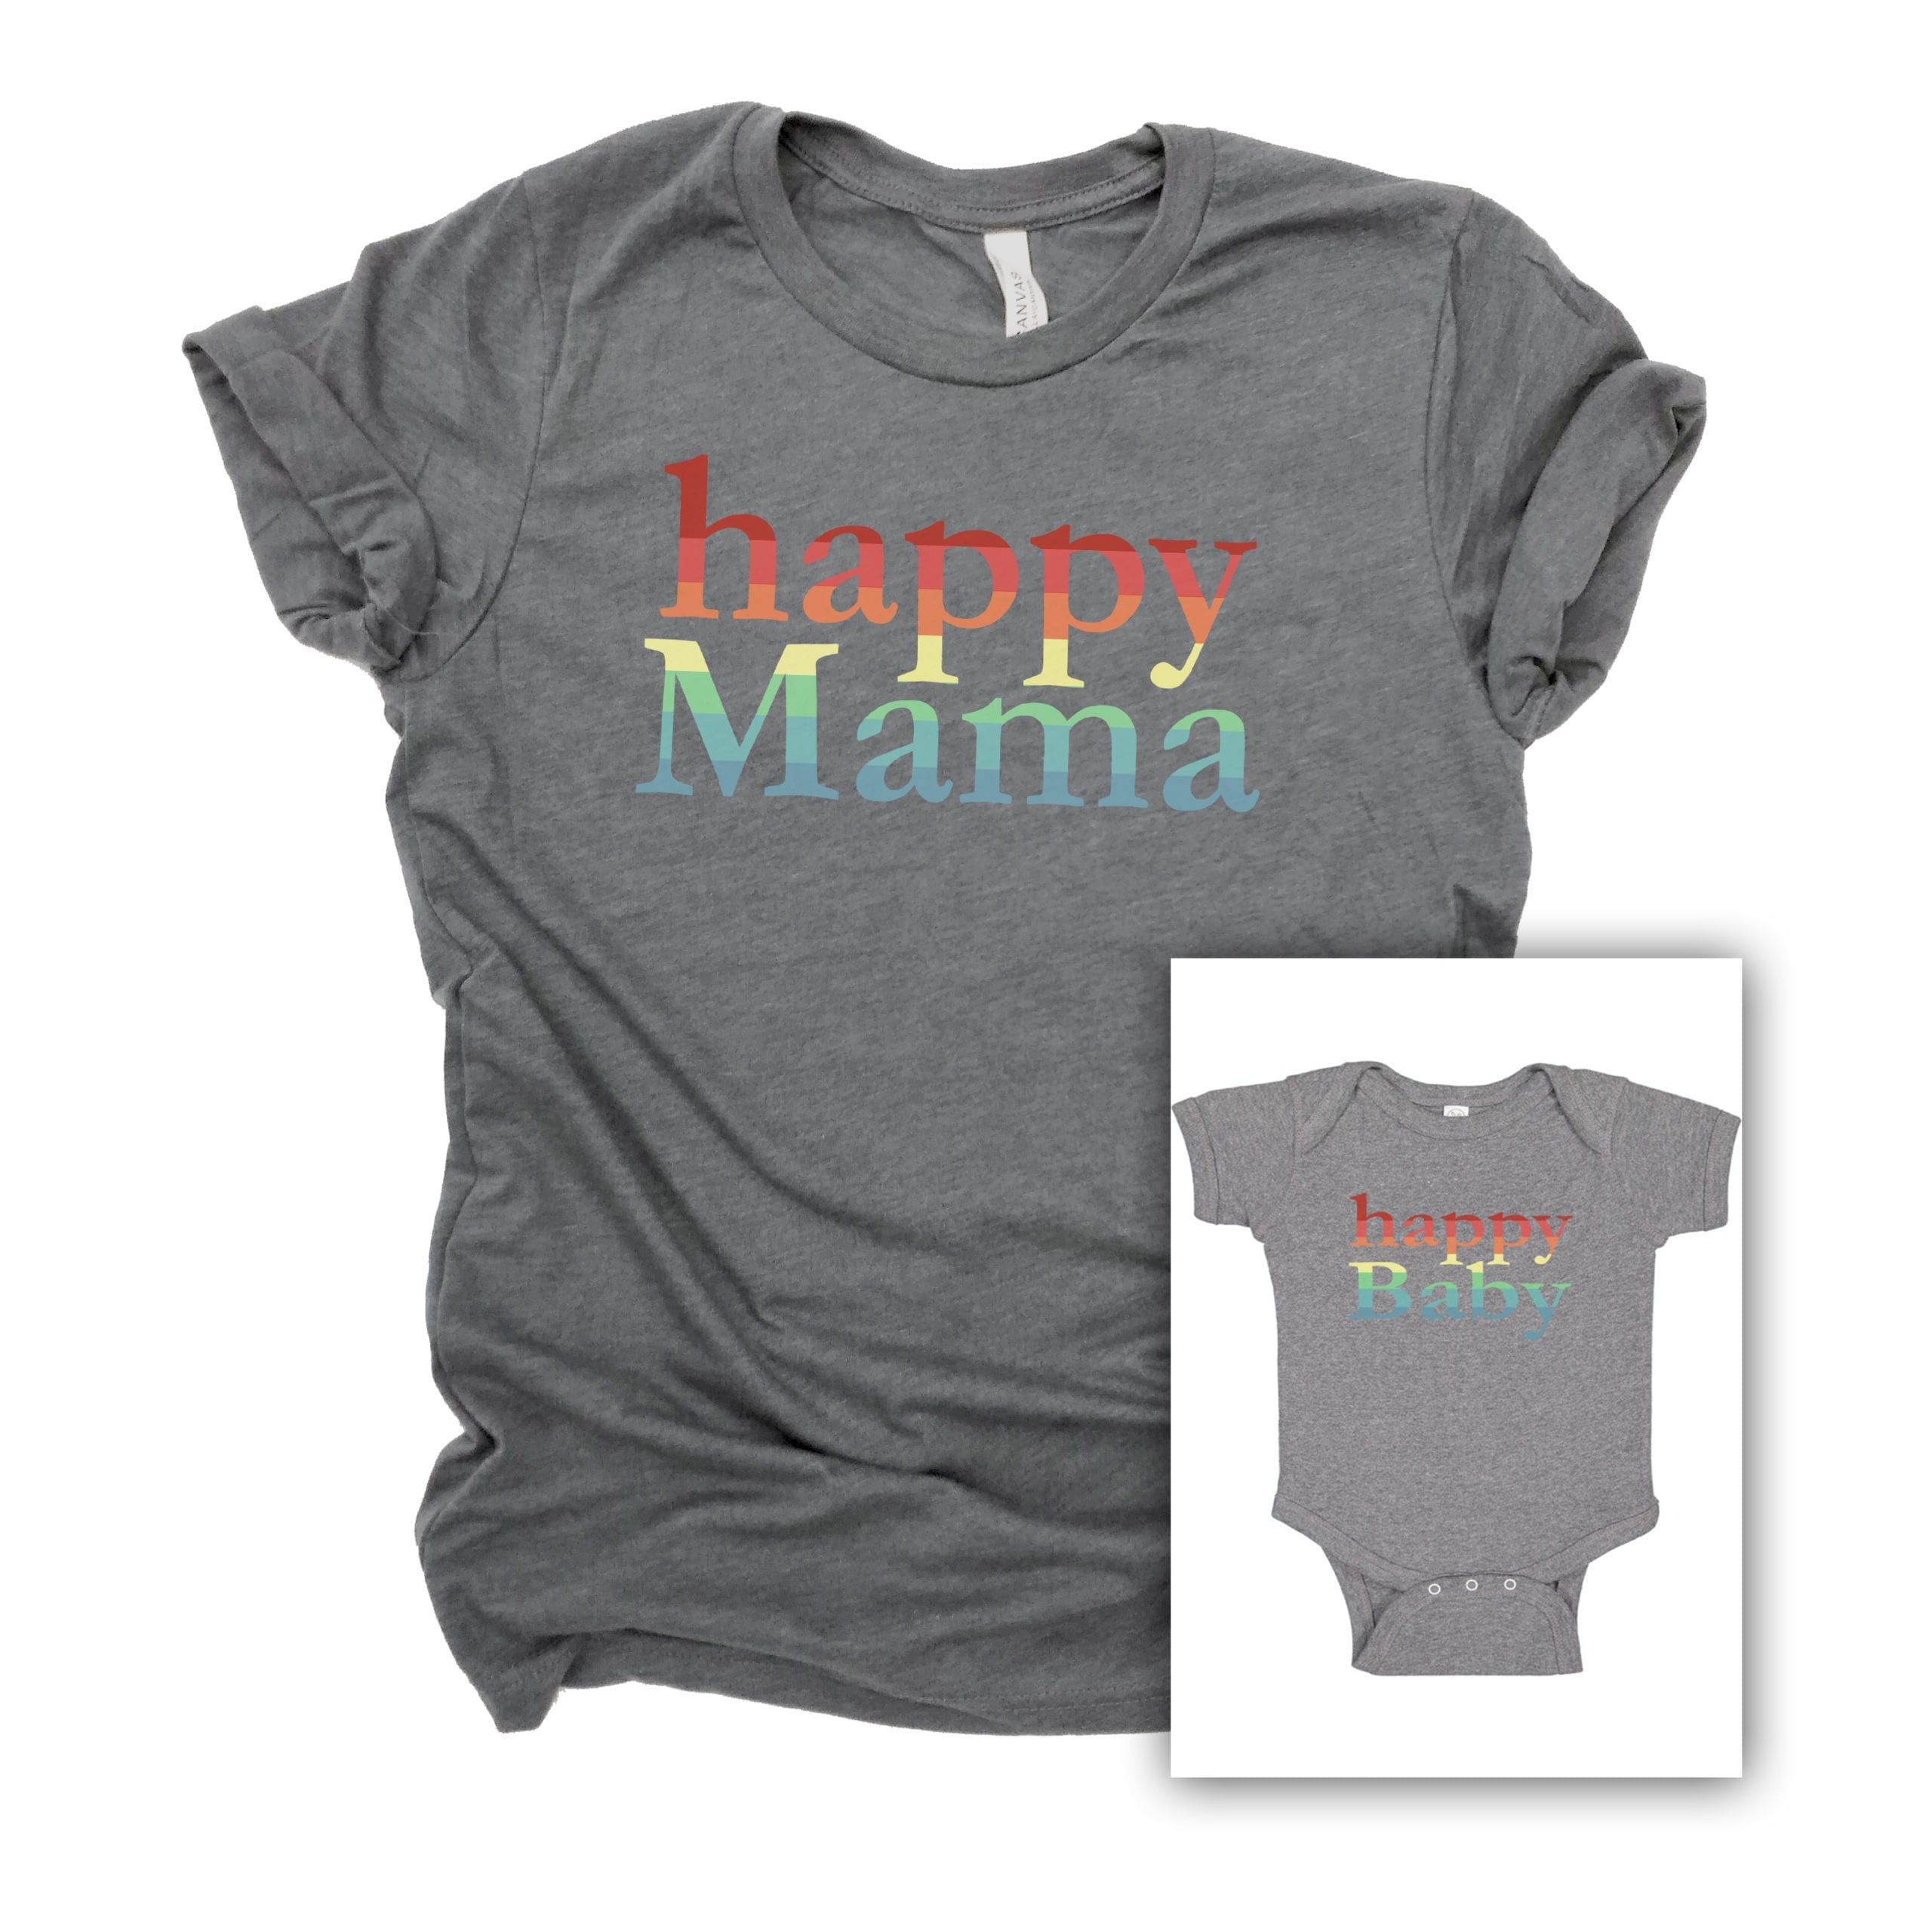 A gray t-shirt with the colorful text "happy Mama" printed across the chest, paired with a smaller image of a gray baby onesie with the same design, suggesting a matching set for mother and child.